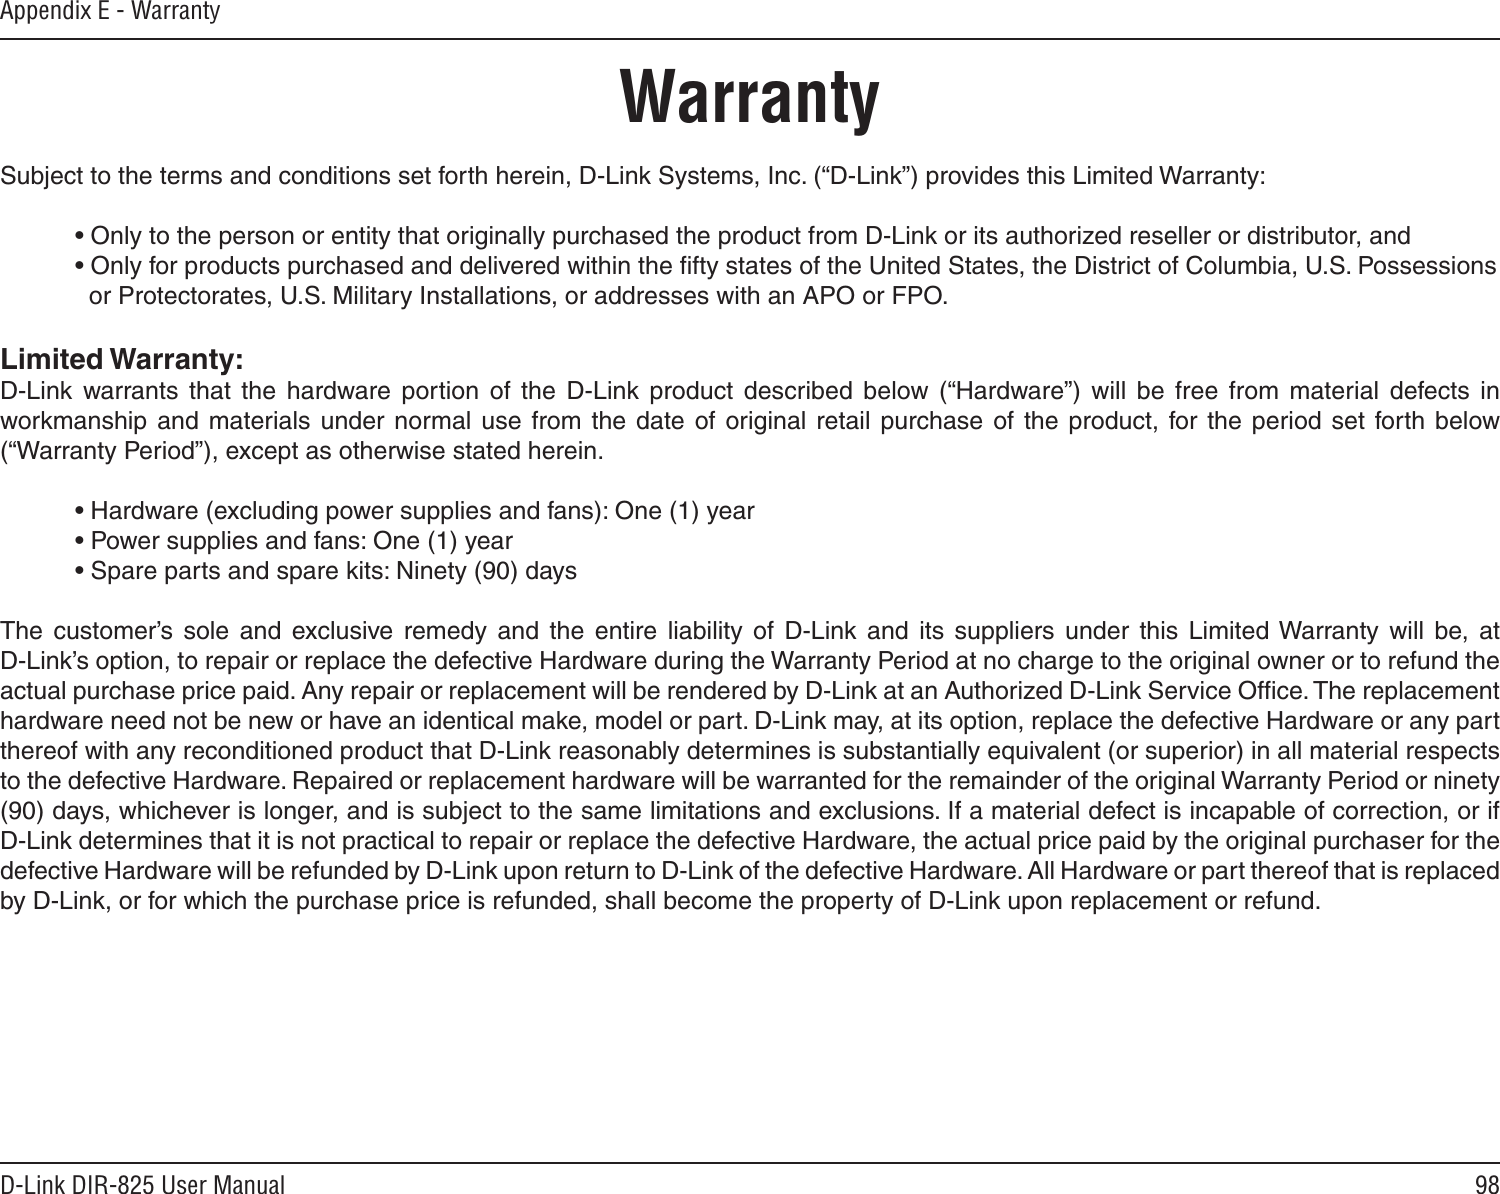 98D-Link DIR-825 User ManualAppendix E - WarrantyWarrantySubject to the terms and conditions set forth herein, D-Link Systems, Inc. (“D-Link”) provides this Limited Warranty:  • Only to the person or entity that originally purchased the product from D-Link or its authorized reseller or distributor, and  • Only for products purchased and delivered within the ﬁfty states of the United States, the District of Columbia, U.S. Possessions      or Protectorates, U.S. Military Installations, or addresses with an APO or FPO.Limited Warranty:D-Link  warrants  that  the  hardware  portion  of  the  D-Link  product  described  below  (“Hardware”)  will  be  free  from  material  defects  in workmanship  and materials  under  normal  use from the date of  original  retail purchase of the product,  for the  period set forth below (“Warranty Period”), except as otherwise stated herein.  • Hardware (excluding power supplies and fans): One (1) year  • Power supplies and fans: One (1) year  • Spare parts and spare kits: Ninety (90) daysThe  customer’s  sole  and  exclusive  remedy  and  the  entire  liability  of  D-Link  and  its  suppliers  under  this  Limited Warranty  will  be,  at  D-Link’s option, to repair or replace the defective Hardware during the Warranty Period at no charge to the original owner or to refund the actual purchase price paid. Any repair or replacement will be rendered by D-Link at an Authorized D-Link Service Ofﬁce. The replacement hardware need not be new or have an identical make, model or part. D-Link may, at its option, replace the defective Hardware or any part thereof with any reconditioned product that D-Link reasonably determines is substantially equivalent (or superior) in all material respects to the defective Hardware. Repaired or replacement hardware will be warranted for the remainder of the original Warranty Period or ninety (90) days, whichever is longer, and is subject to the same limitations and exclusions. If a material defect is incapable of correction, or if D-Link determines that it is not practical to repair or replace the defective Hardware, the actual price paid by the original purchaser for the defective Hardware will be refunded by D-Link upon return to D-Link of the defective Hardware. All Hardware or part thereof that is replaced by D-Link, or for which the purchase price is refunded, shall become the property of D-Link upon replacement or refund.